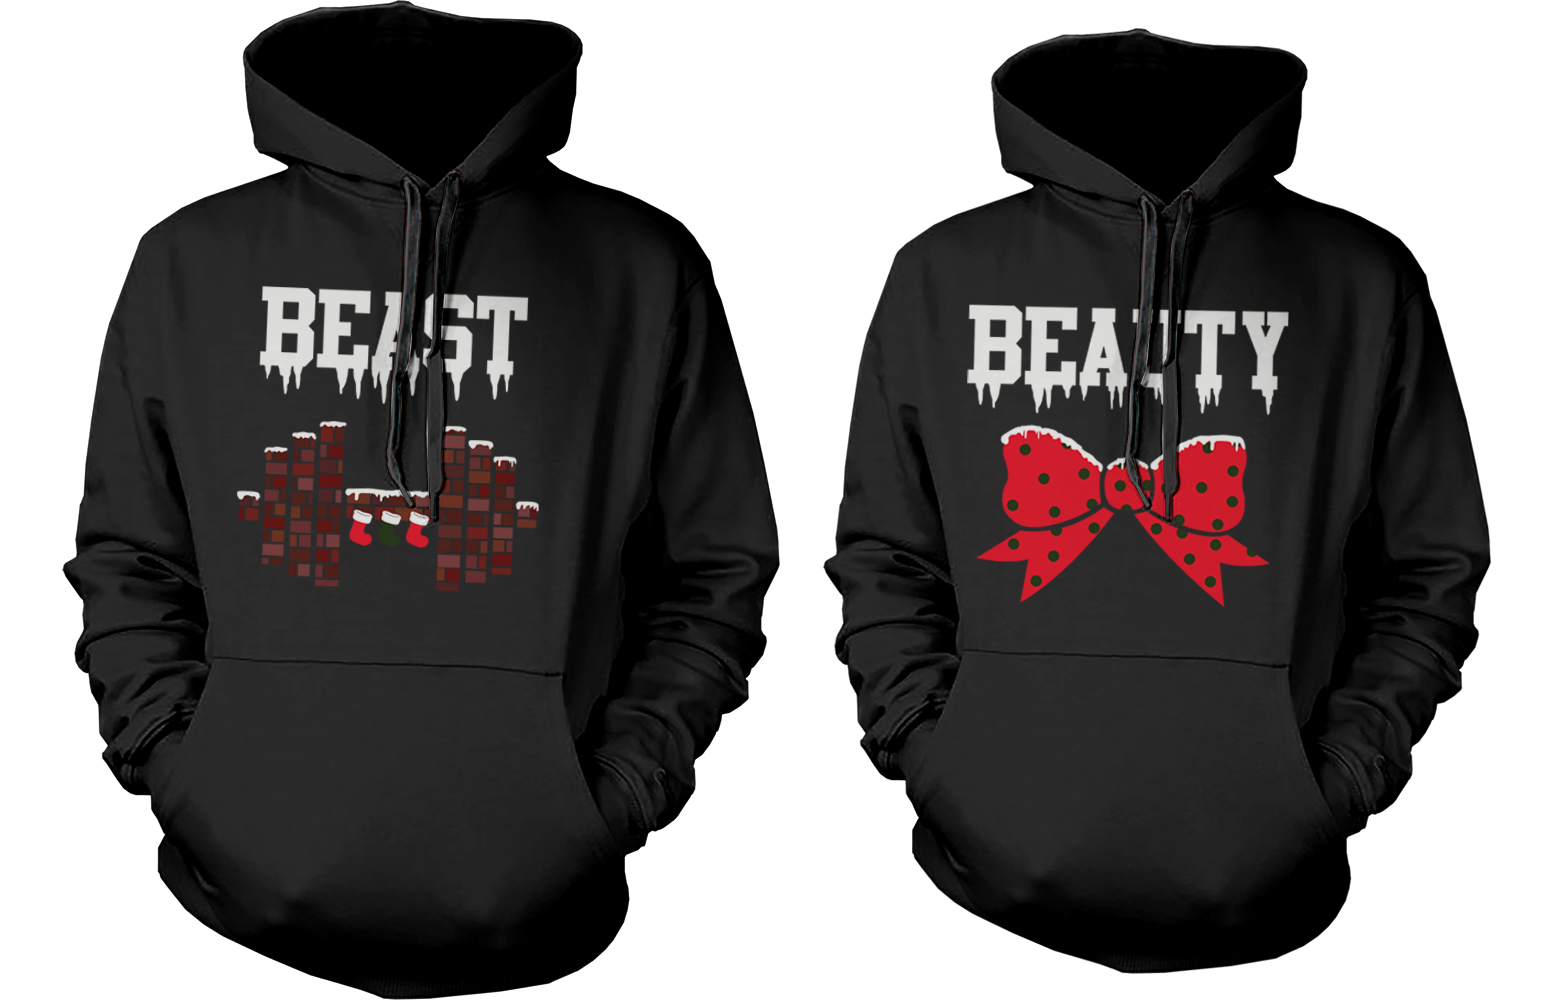 BEAUTY AND BEAST WINTER EDITION MATCHING OUTFIT CUTE X-MAS COUPLE HOODIES